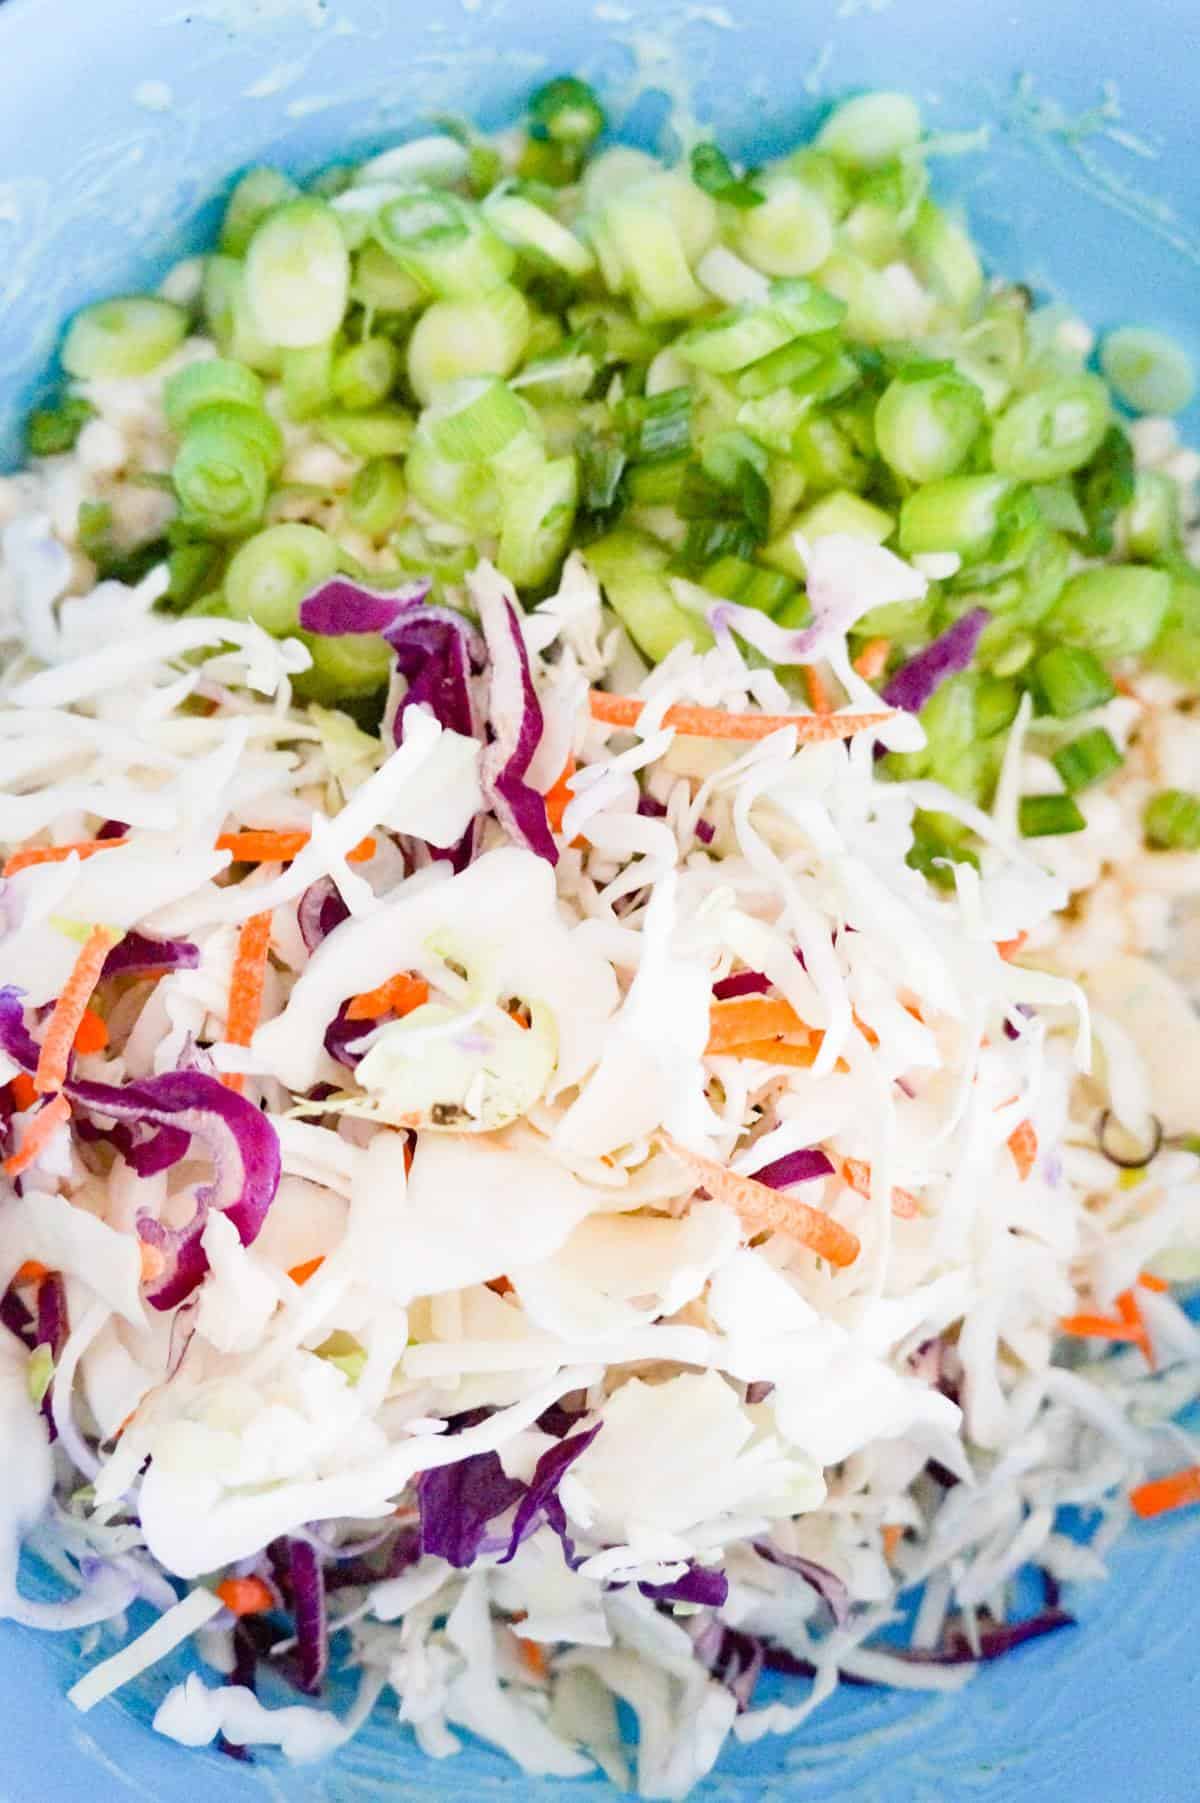 shredded coleslaw mix and chopped green onions in a mixing bowl